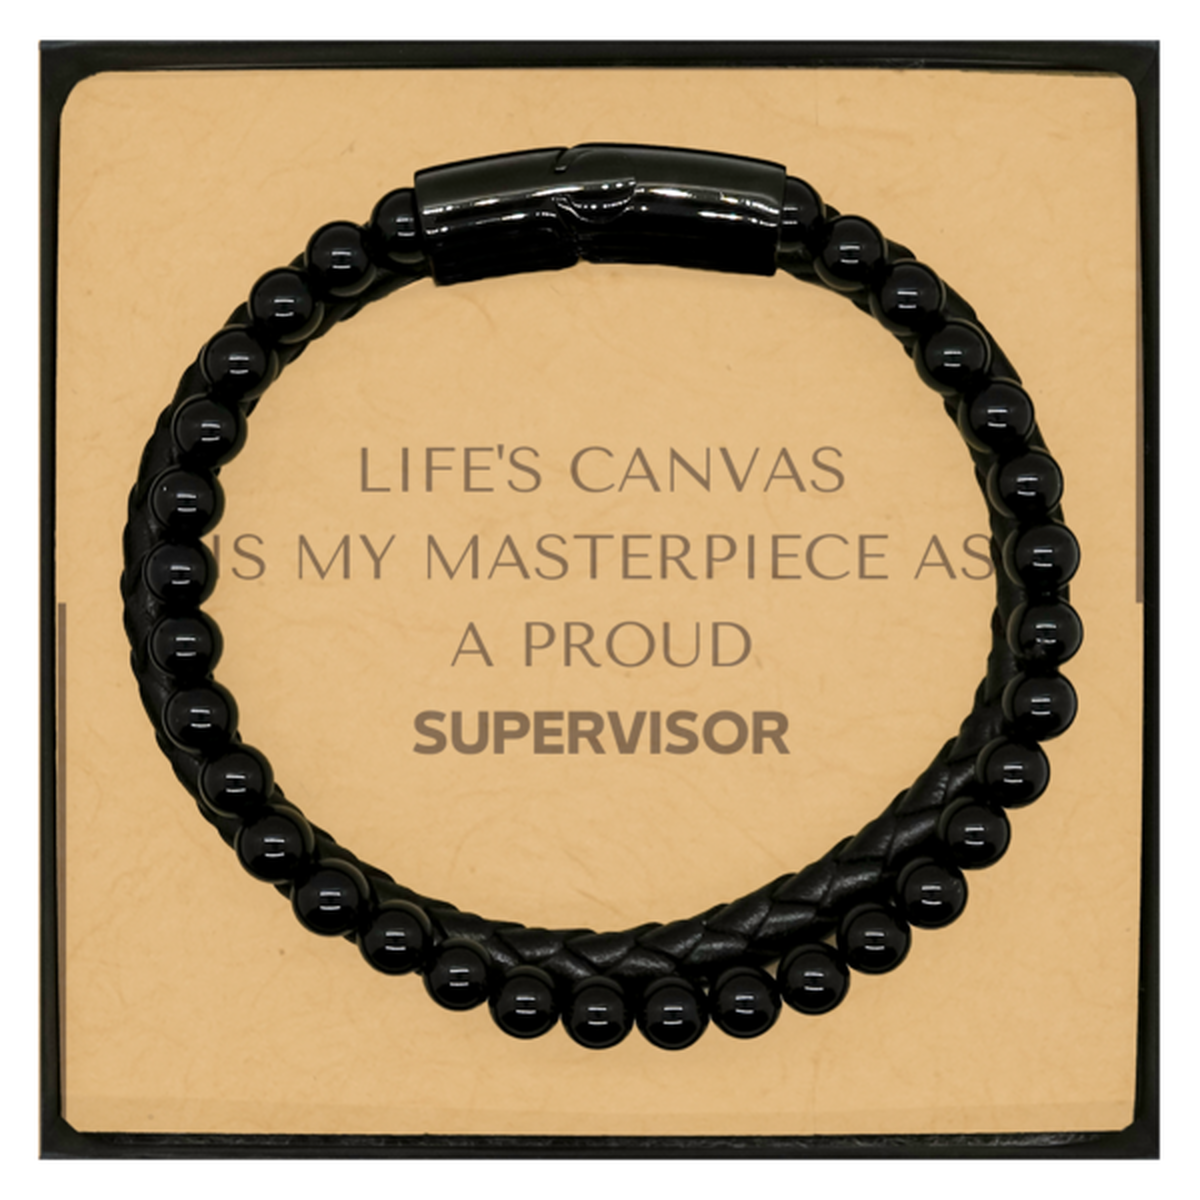 Proud Supervisor Gifts, Life's canvas is my masterpiece, Epic Birthday Christmas Unique Stone Leather Bracelets For Supervisor, Coworkers, Men, Women, Friends